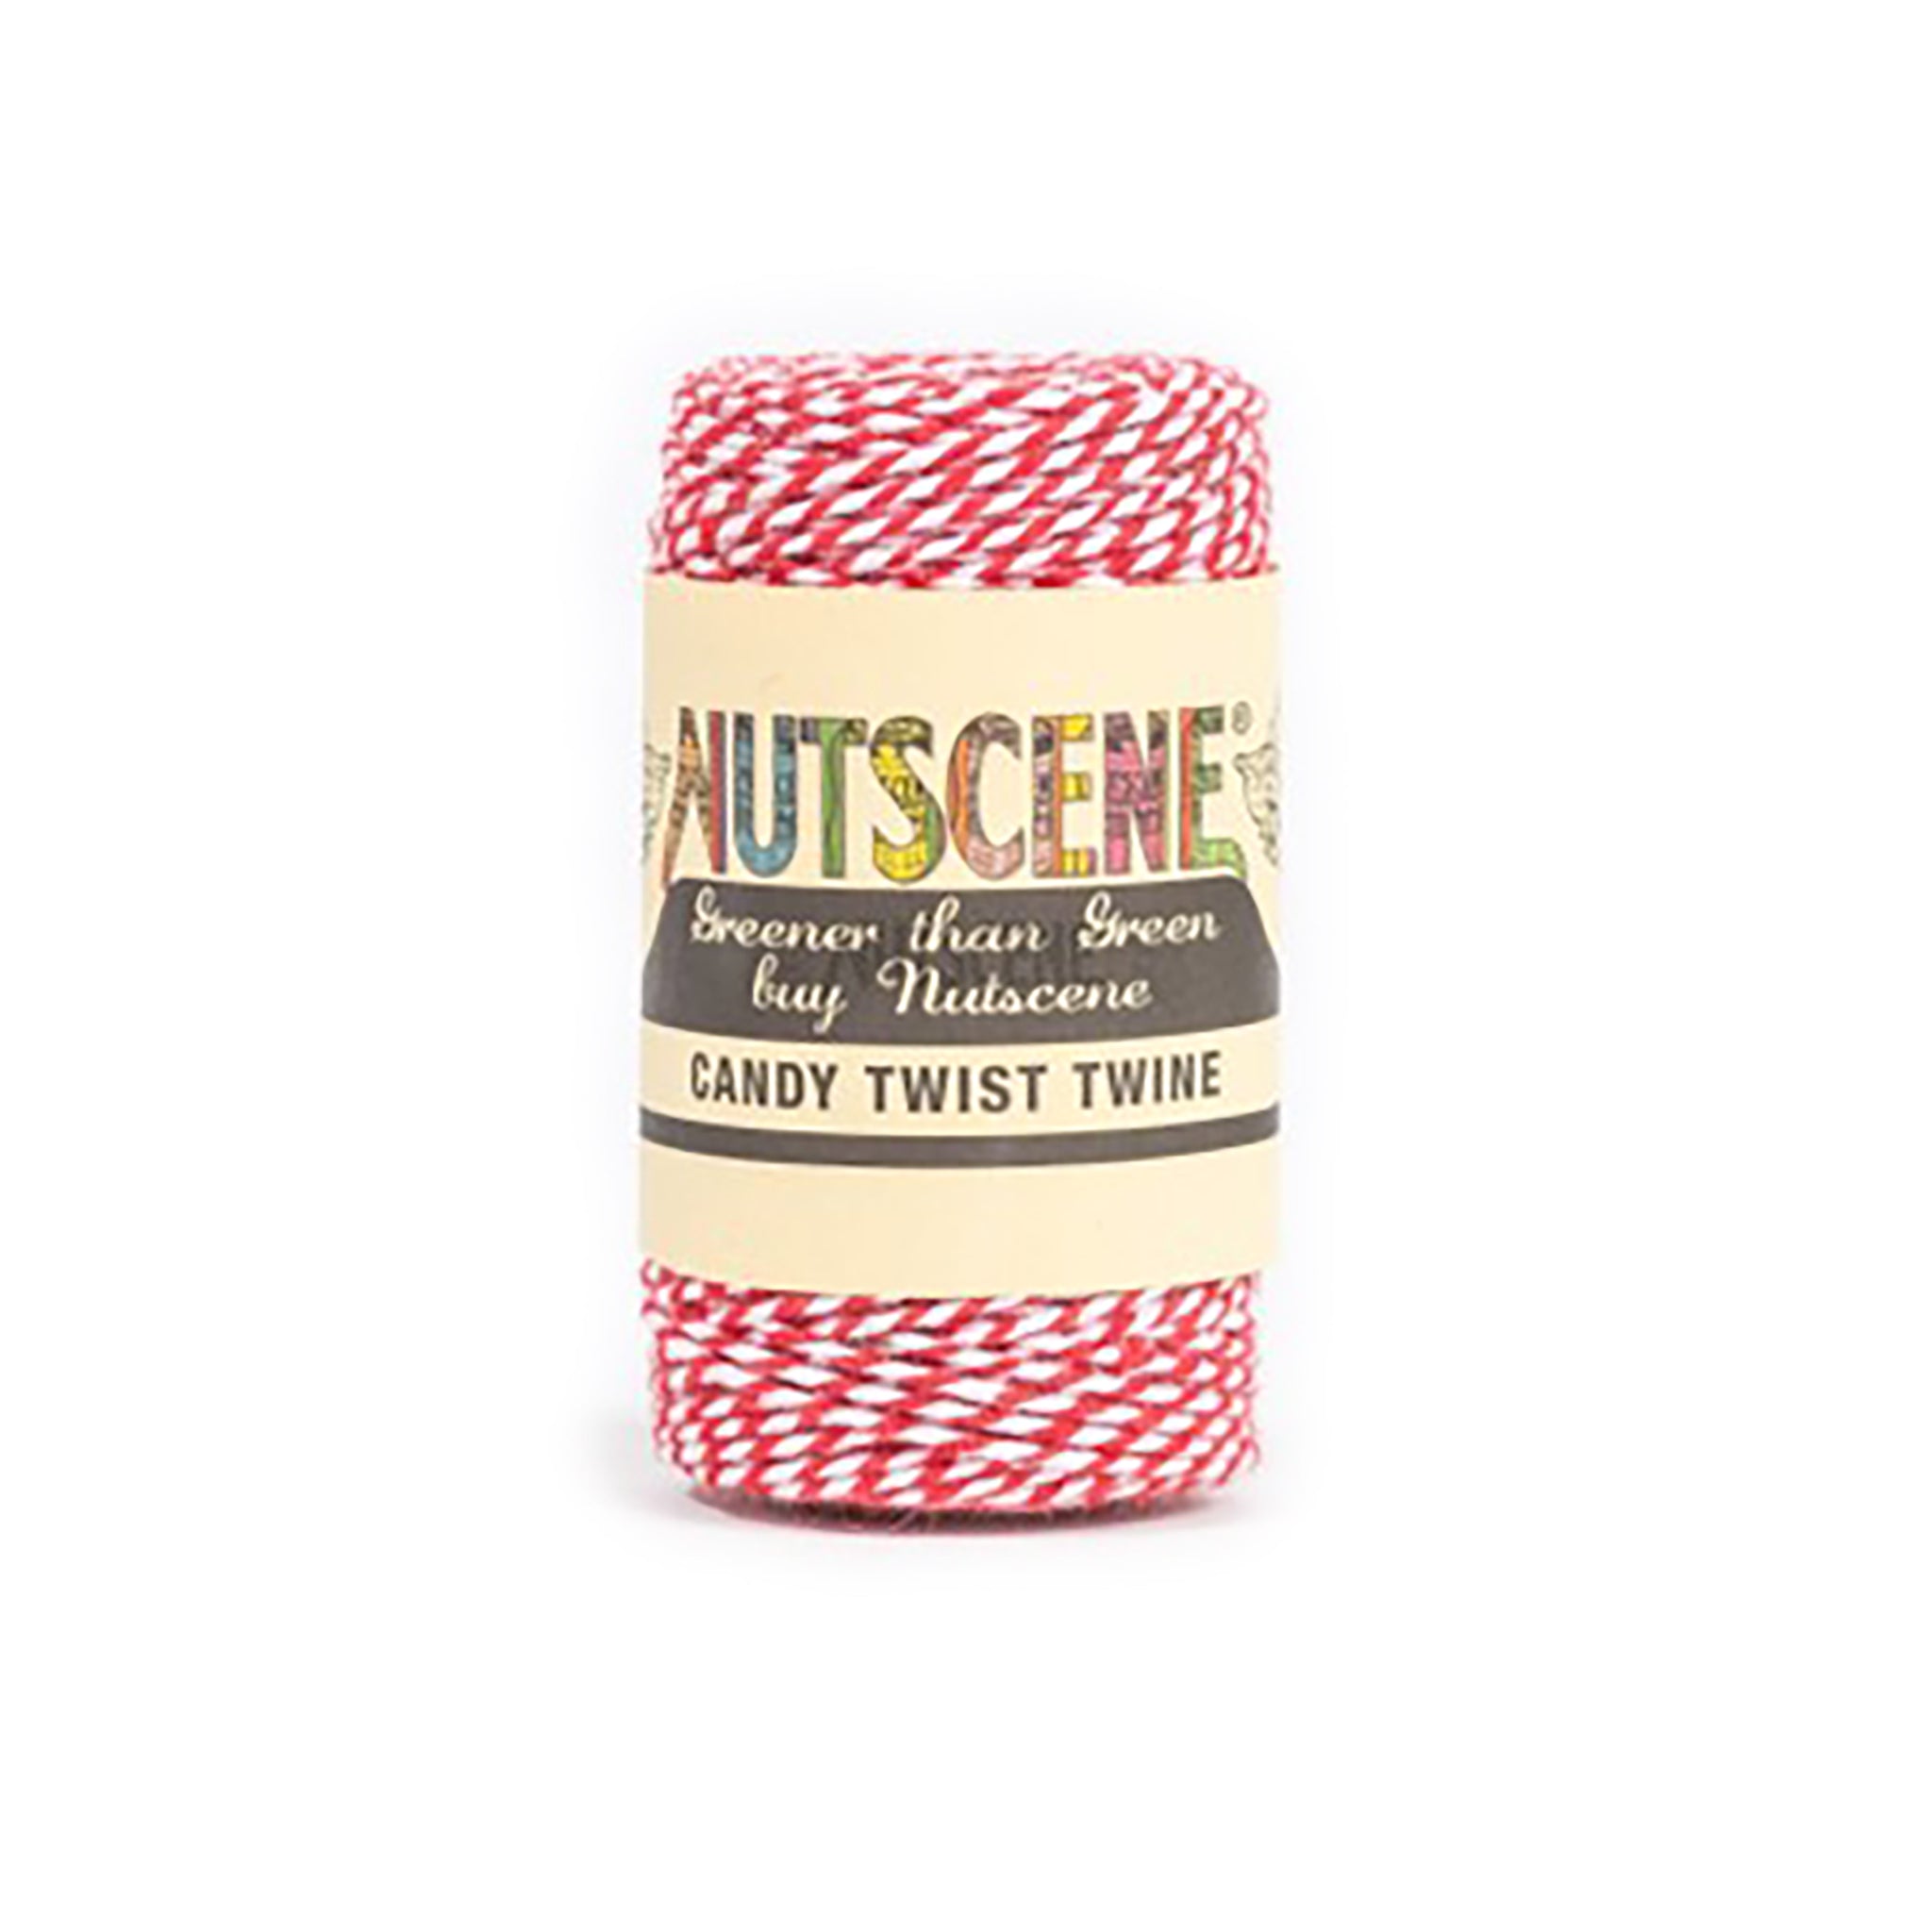 Red and white Nutscene crafting or bakers twine on a white background